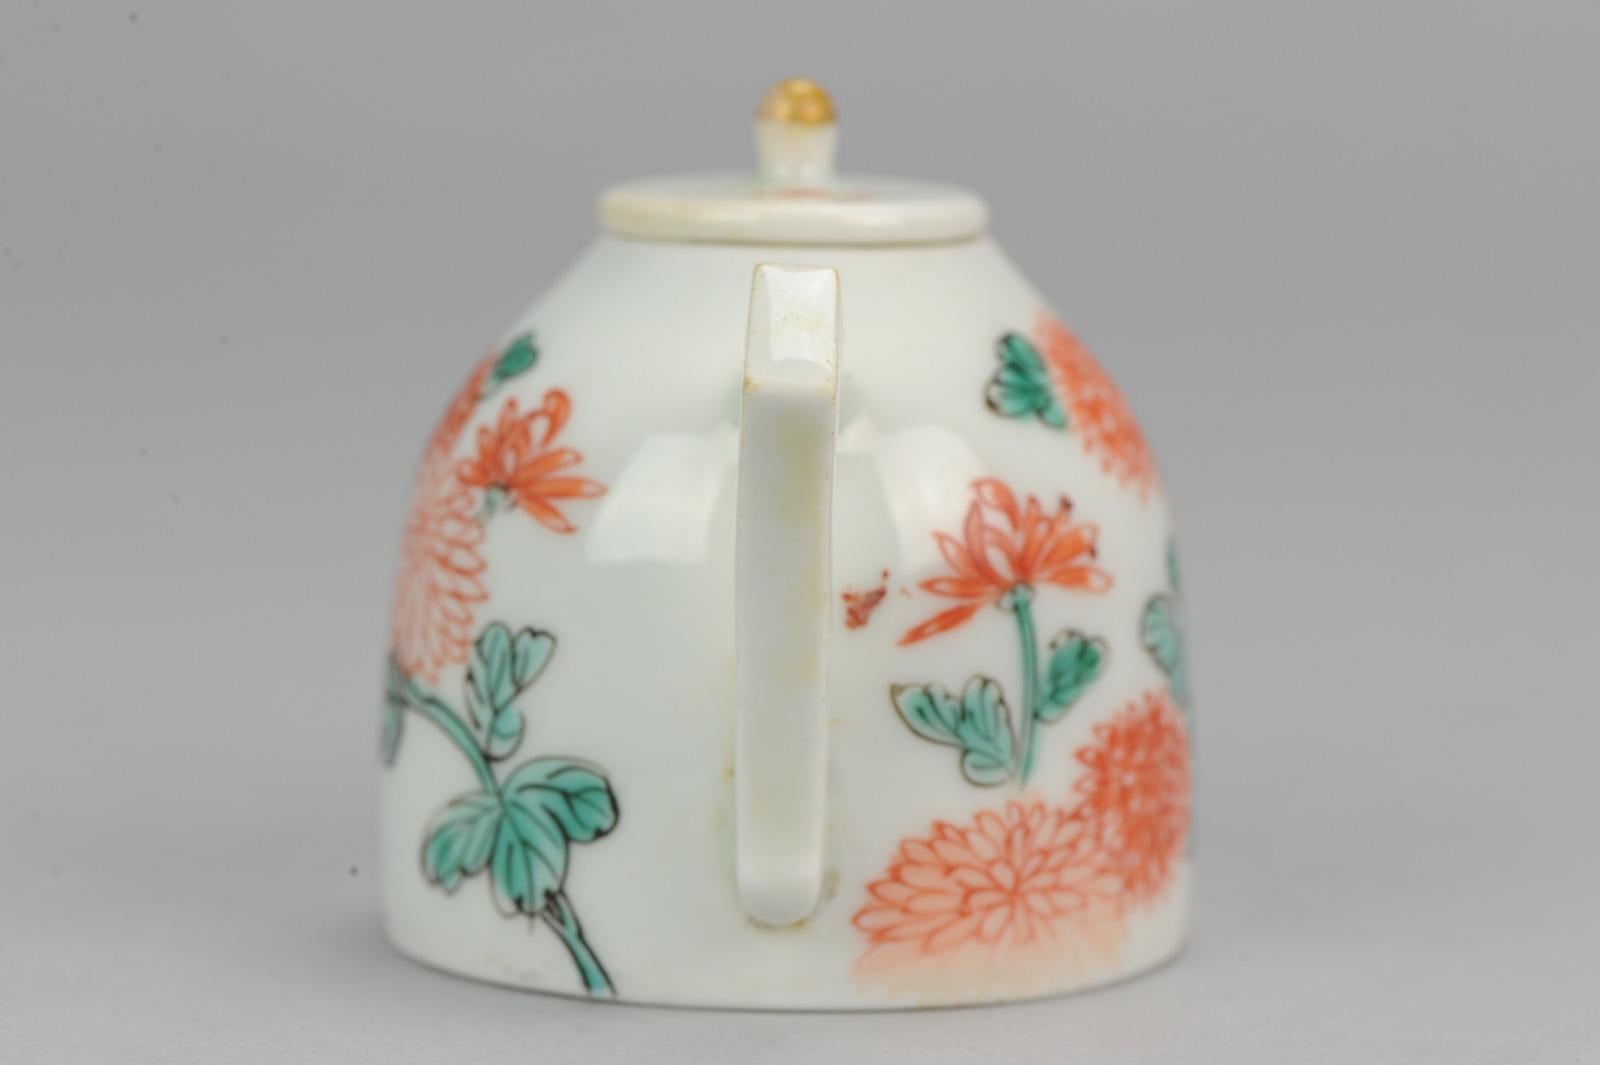 Miniature Rare Japanese Porcelain Teapot Arita Japan Chrysant, circa 1700 In Good Condition For Sale In Amsterdam, Noord Holland